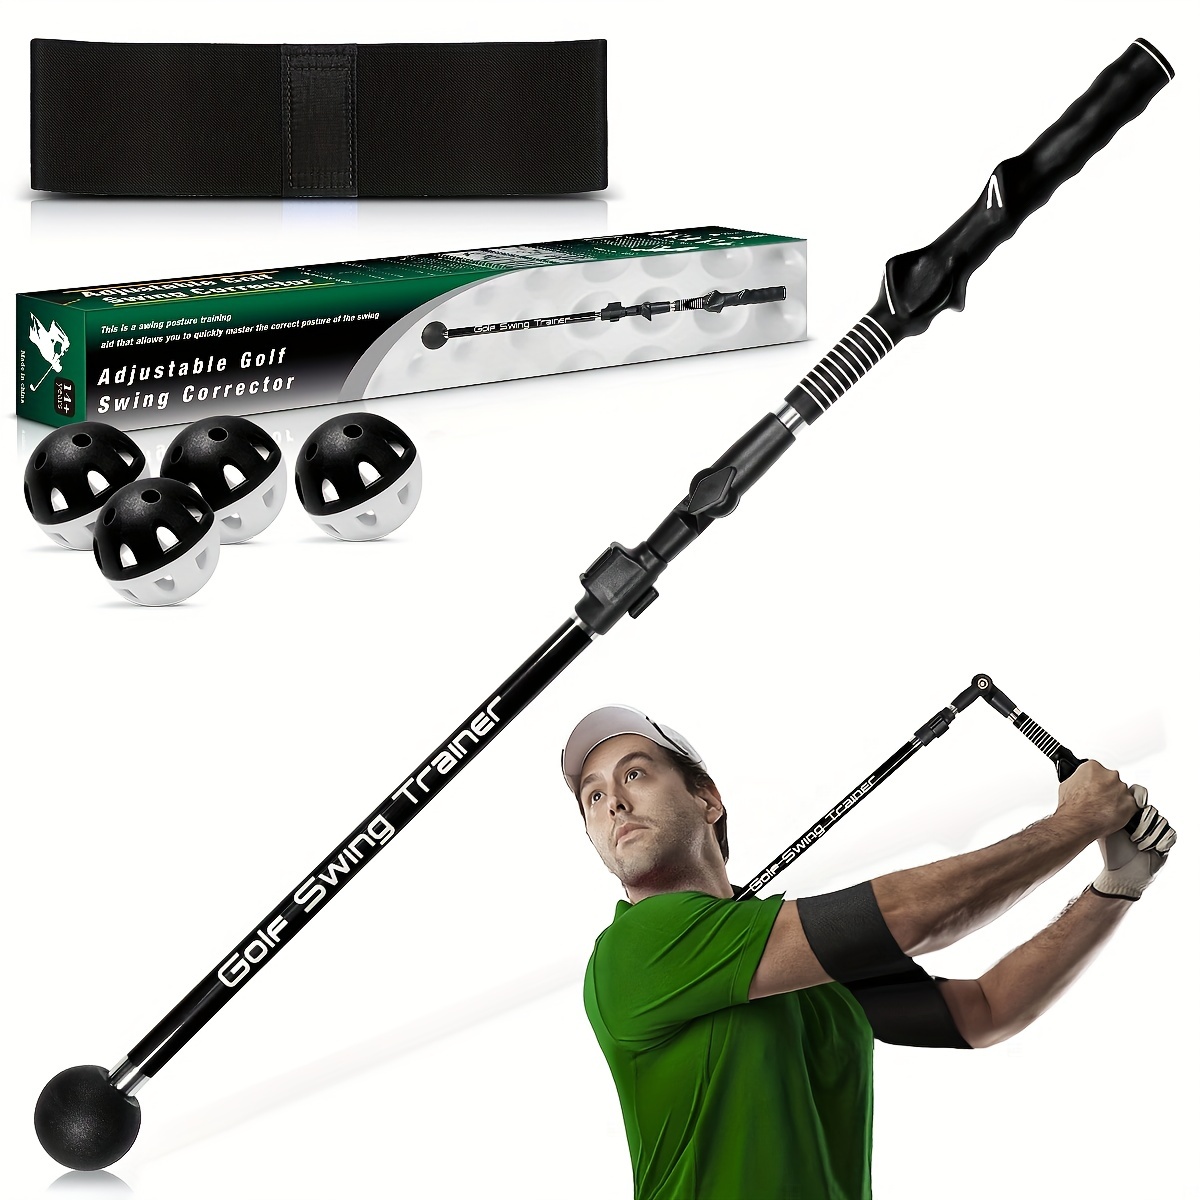 Premium Golf Swing Trainer Aid - Foldable Adjustable Golf Training Aid With  Arm Band And Practice Balls, Included 1 Swing Training Aid& 1 Arm Band & 4  Airflow Hollow Golf Balls